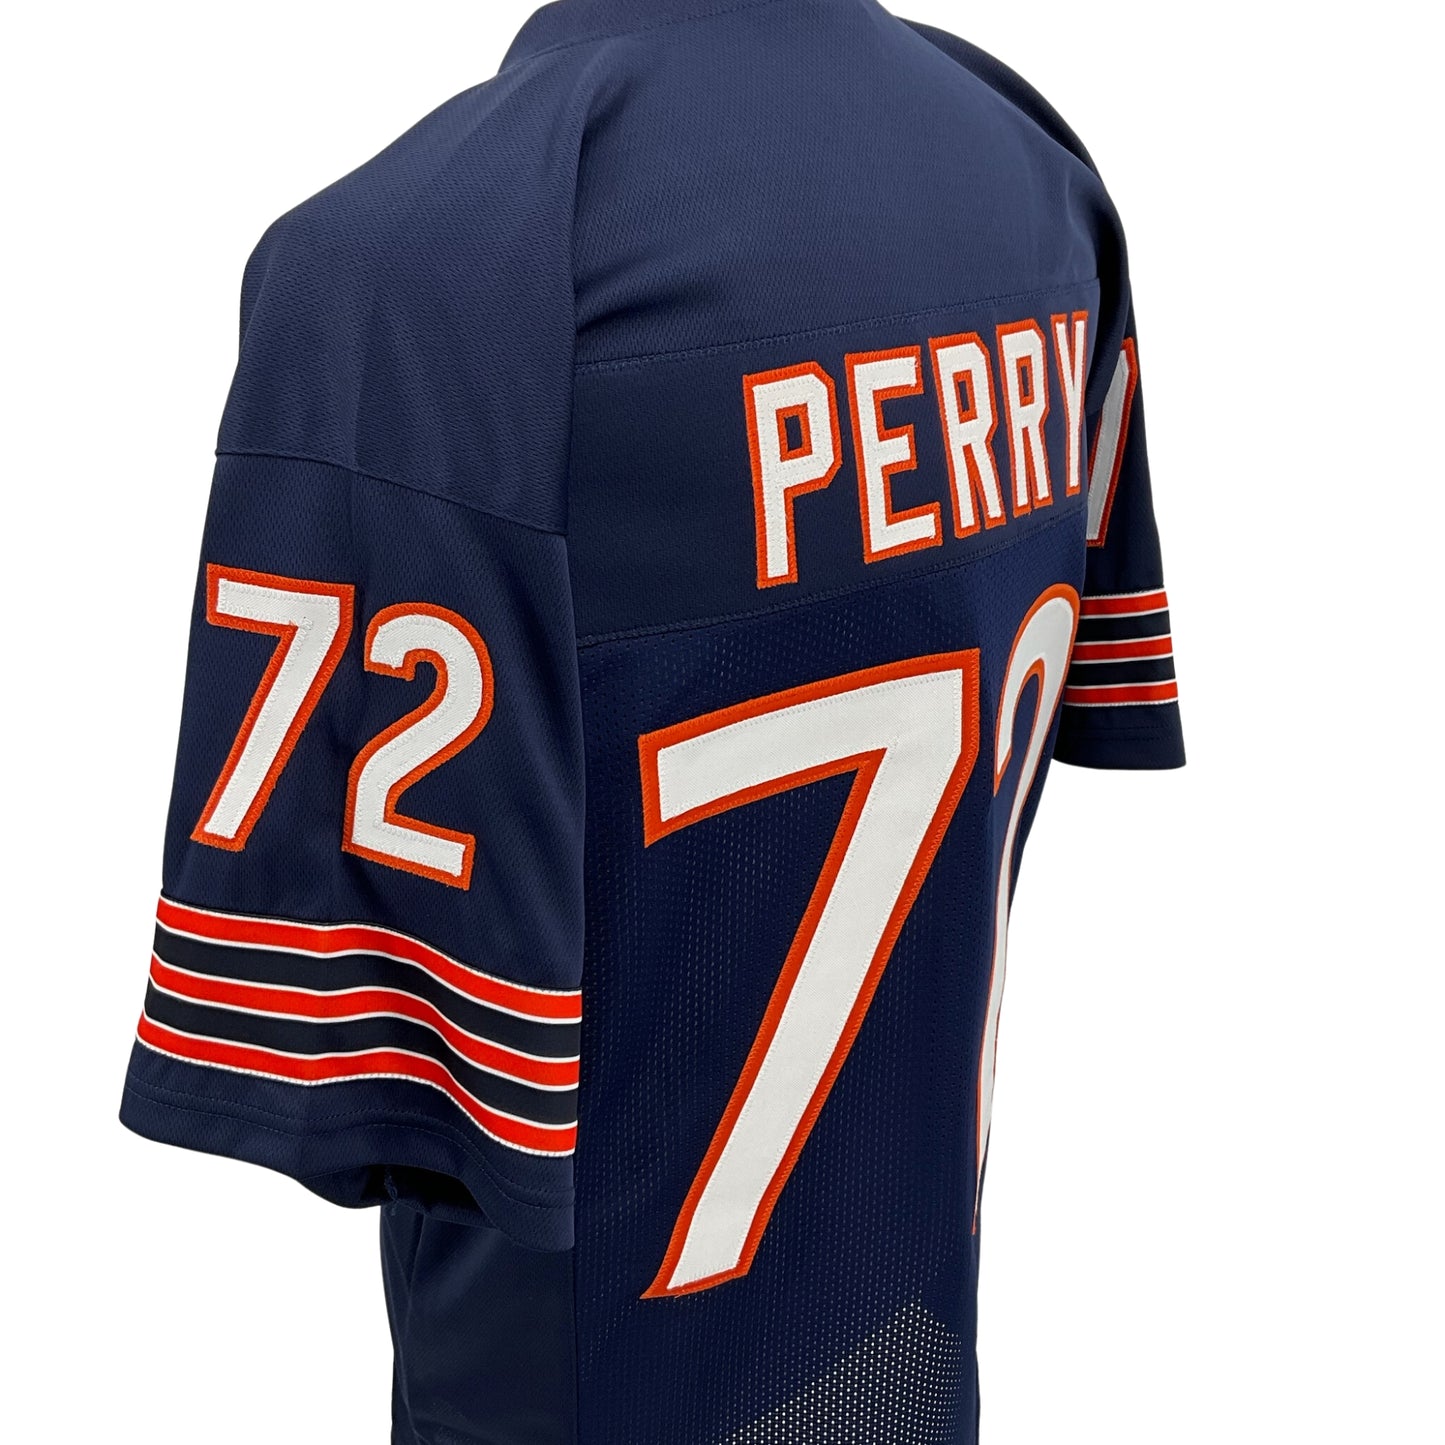 William Perry Jersey Blue Chicago | M-5XL Custom Sewn Stitched